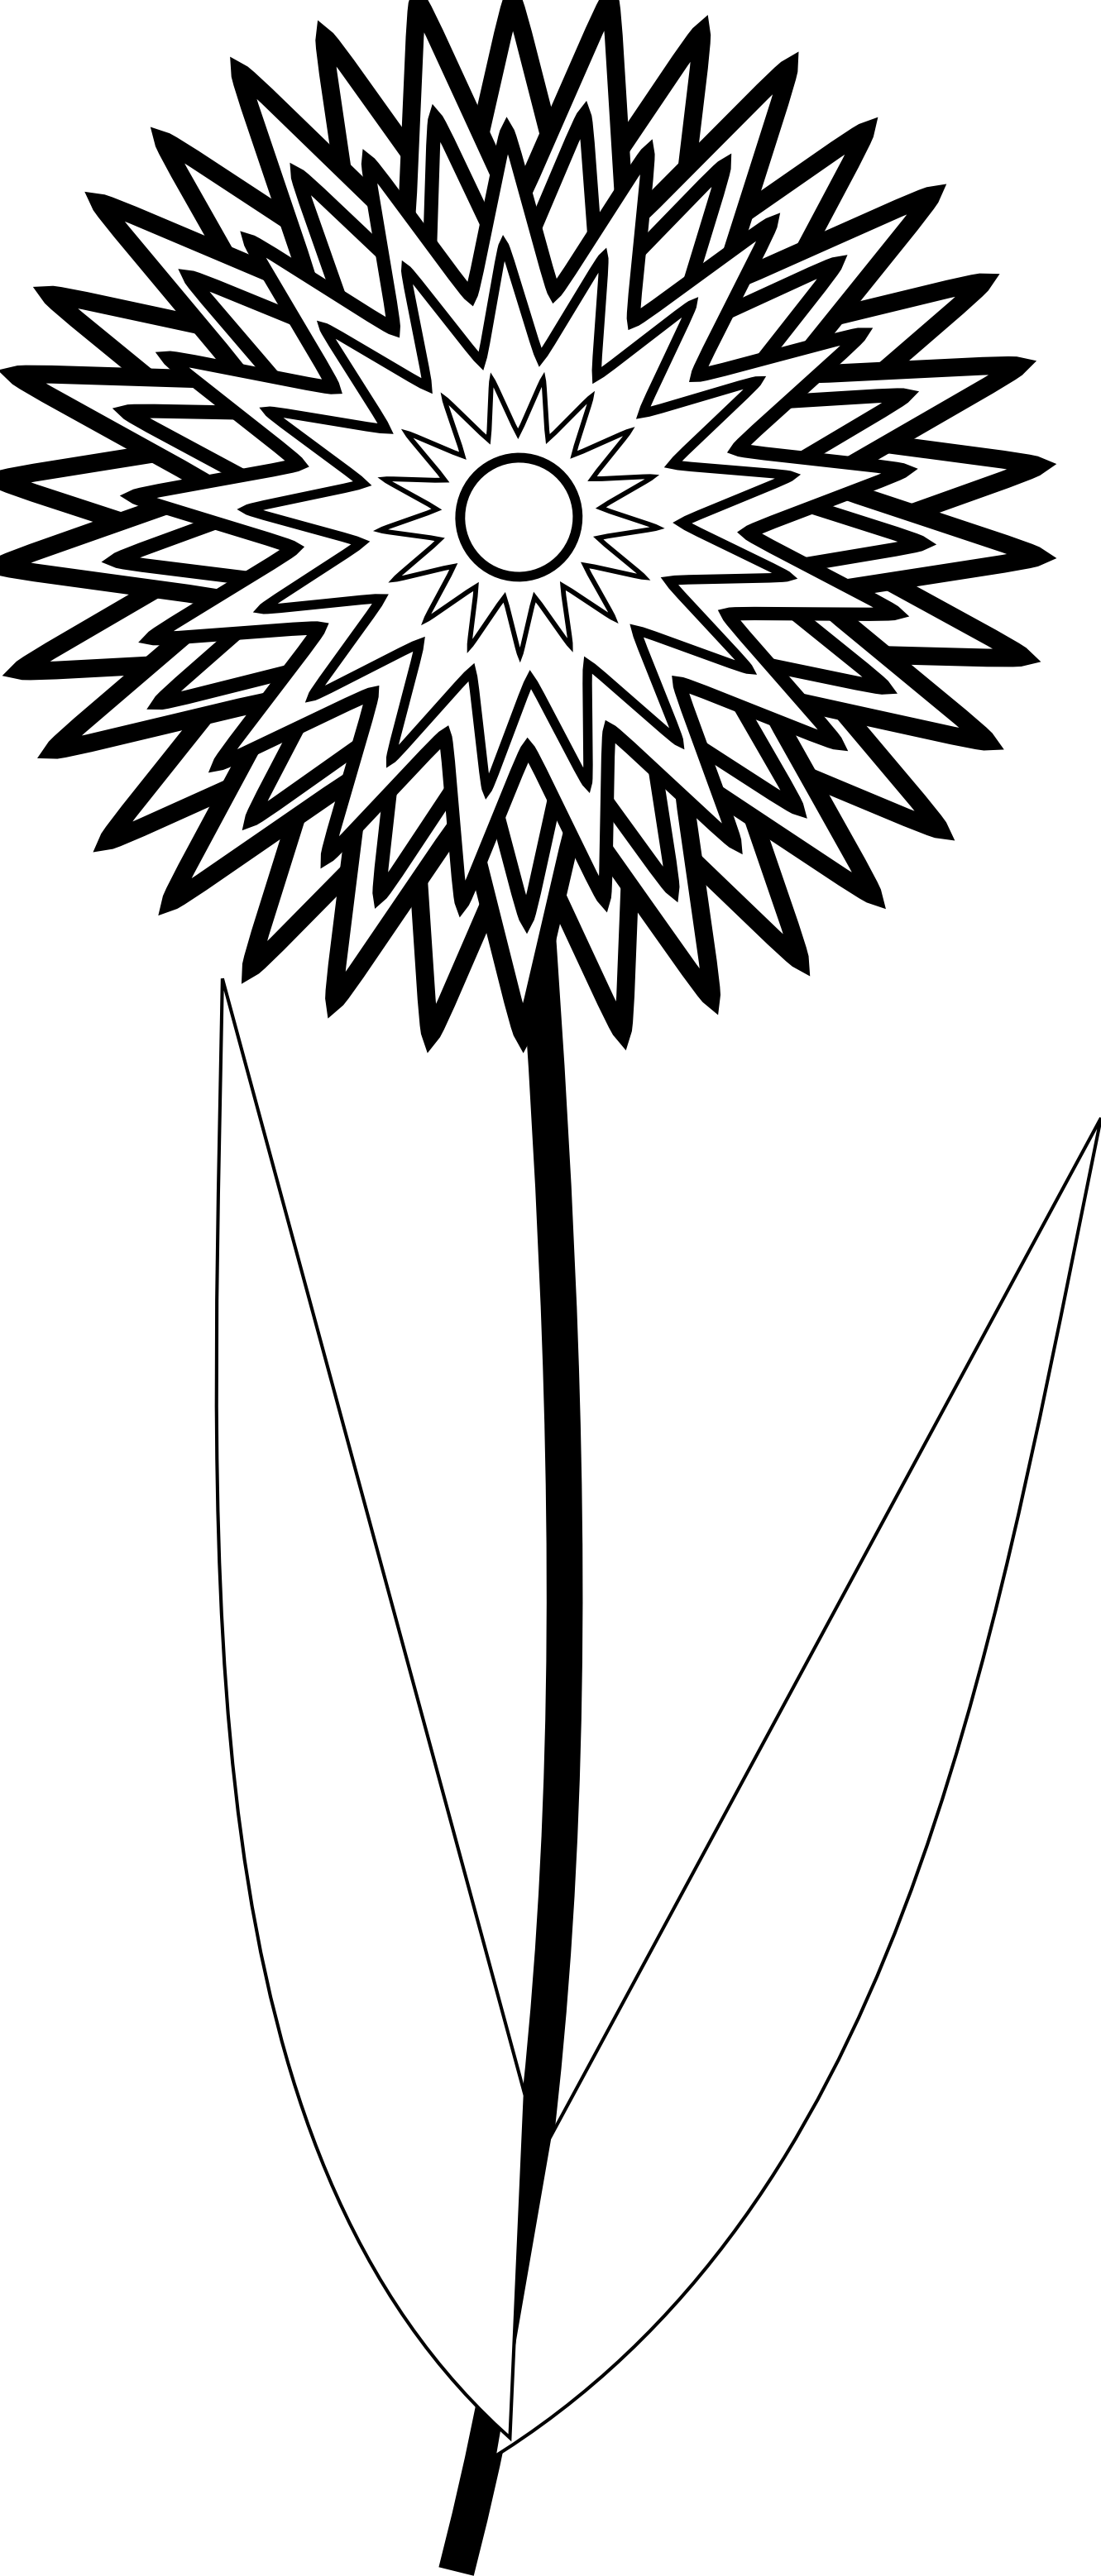 Black White Flower Tattoos - Earth And Sun Coloring Pages (1331x3115)